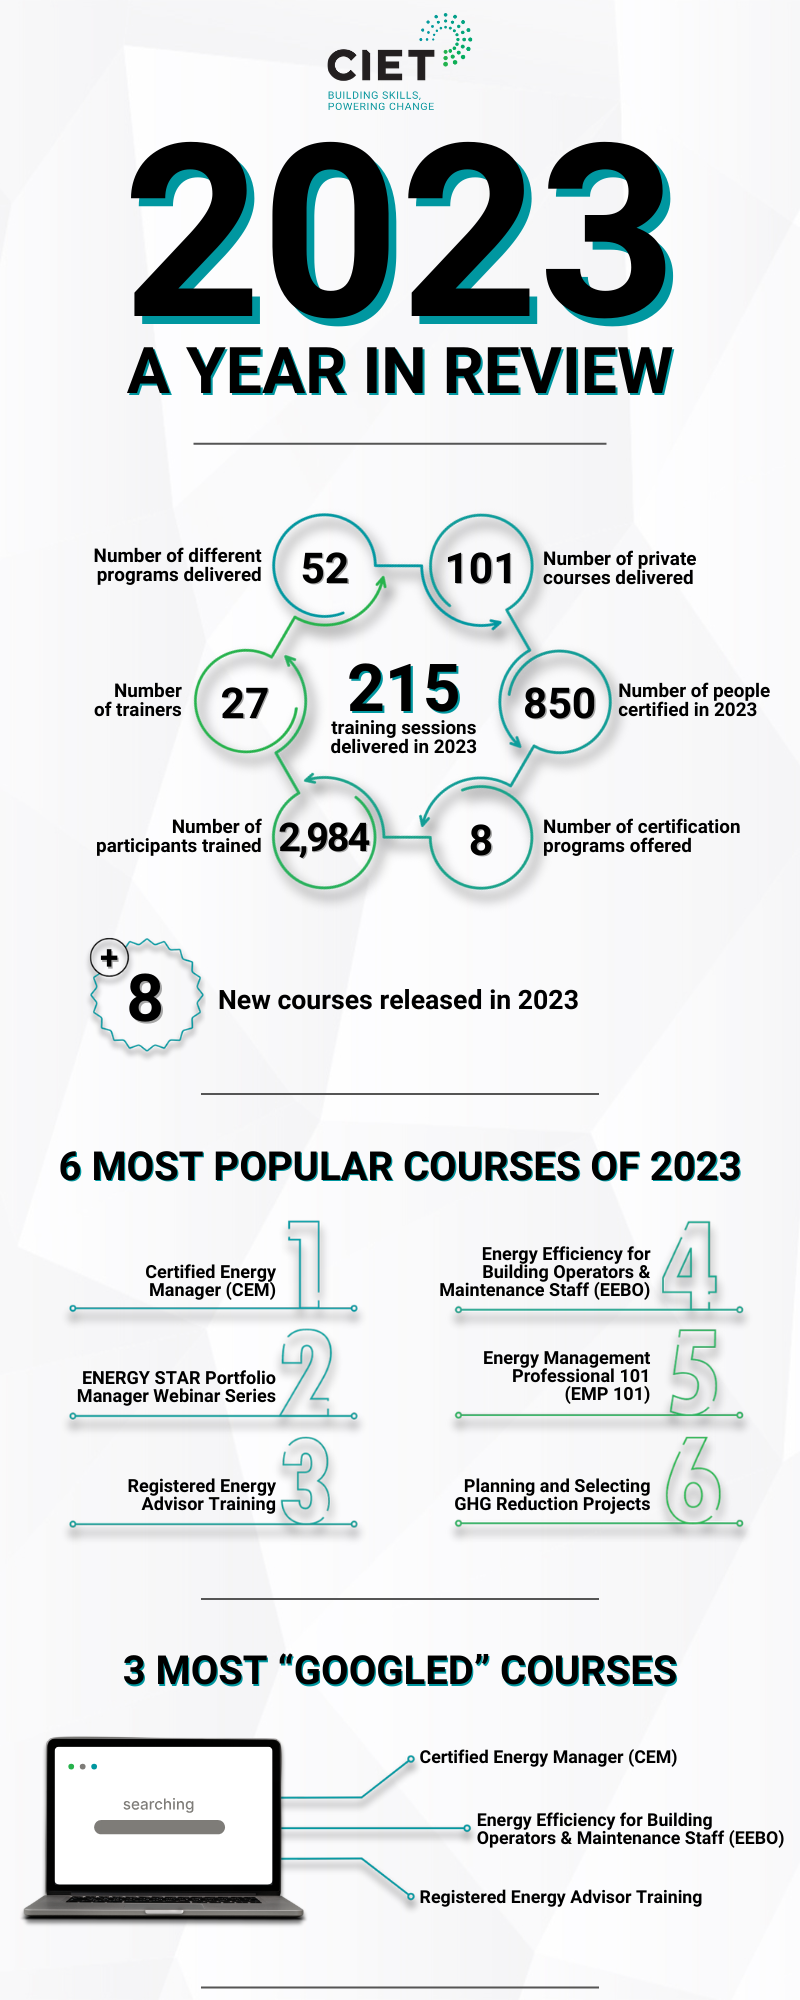 CIET 2023 Year in Review Infographic - Courses